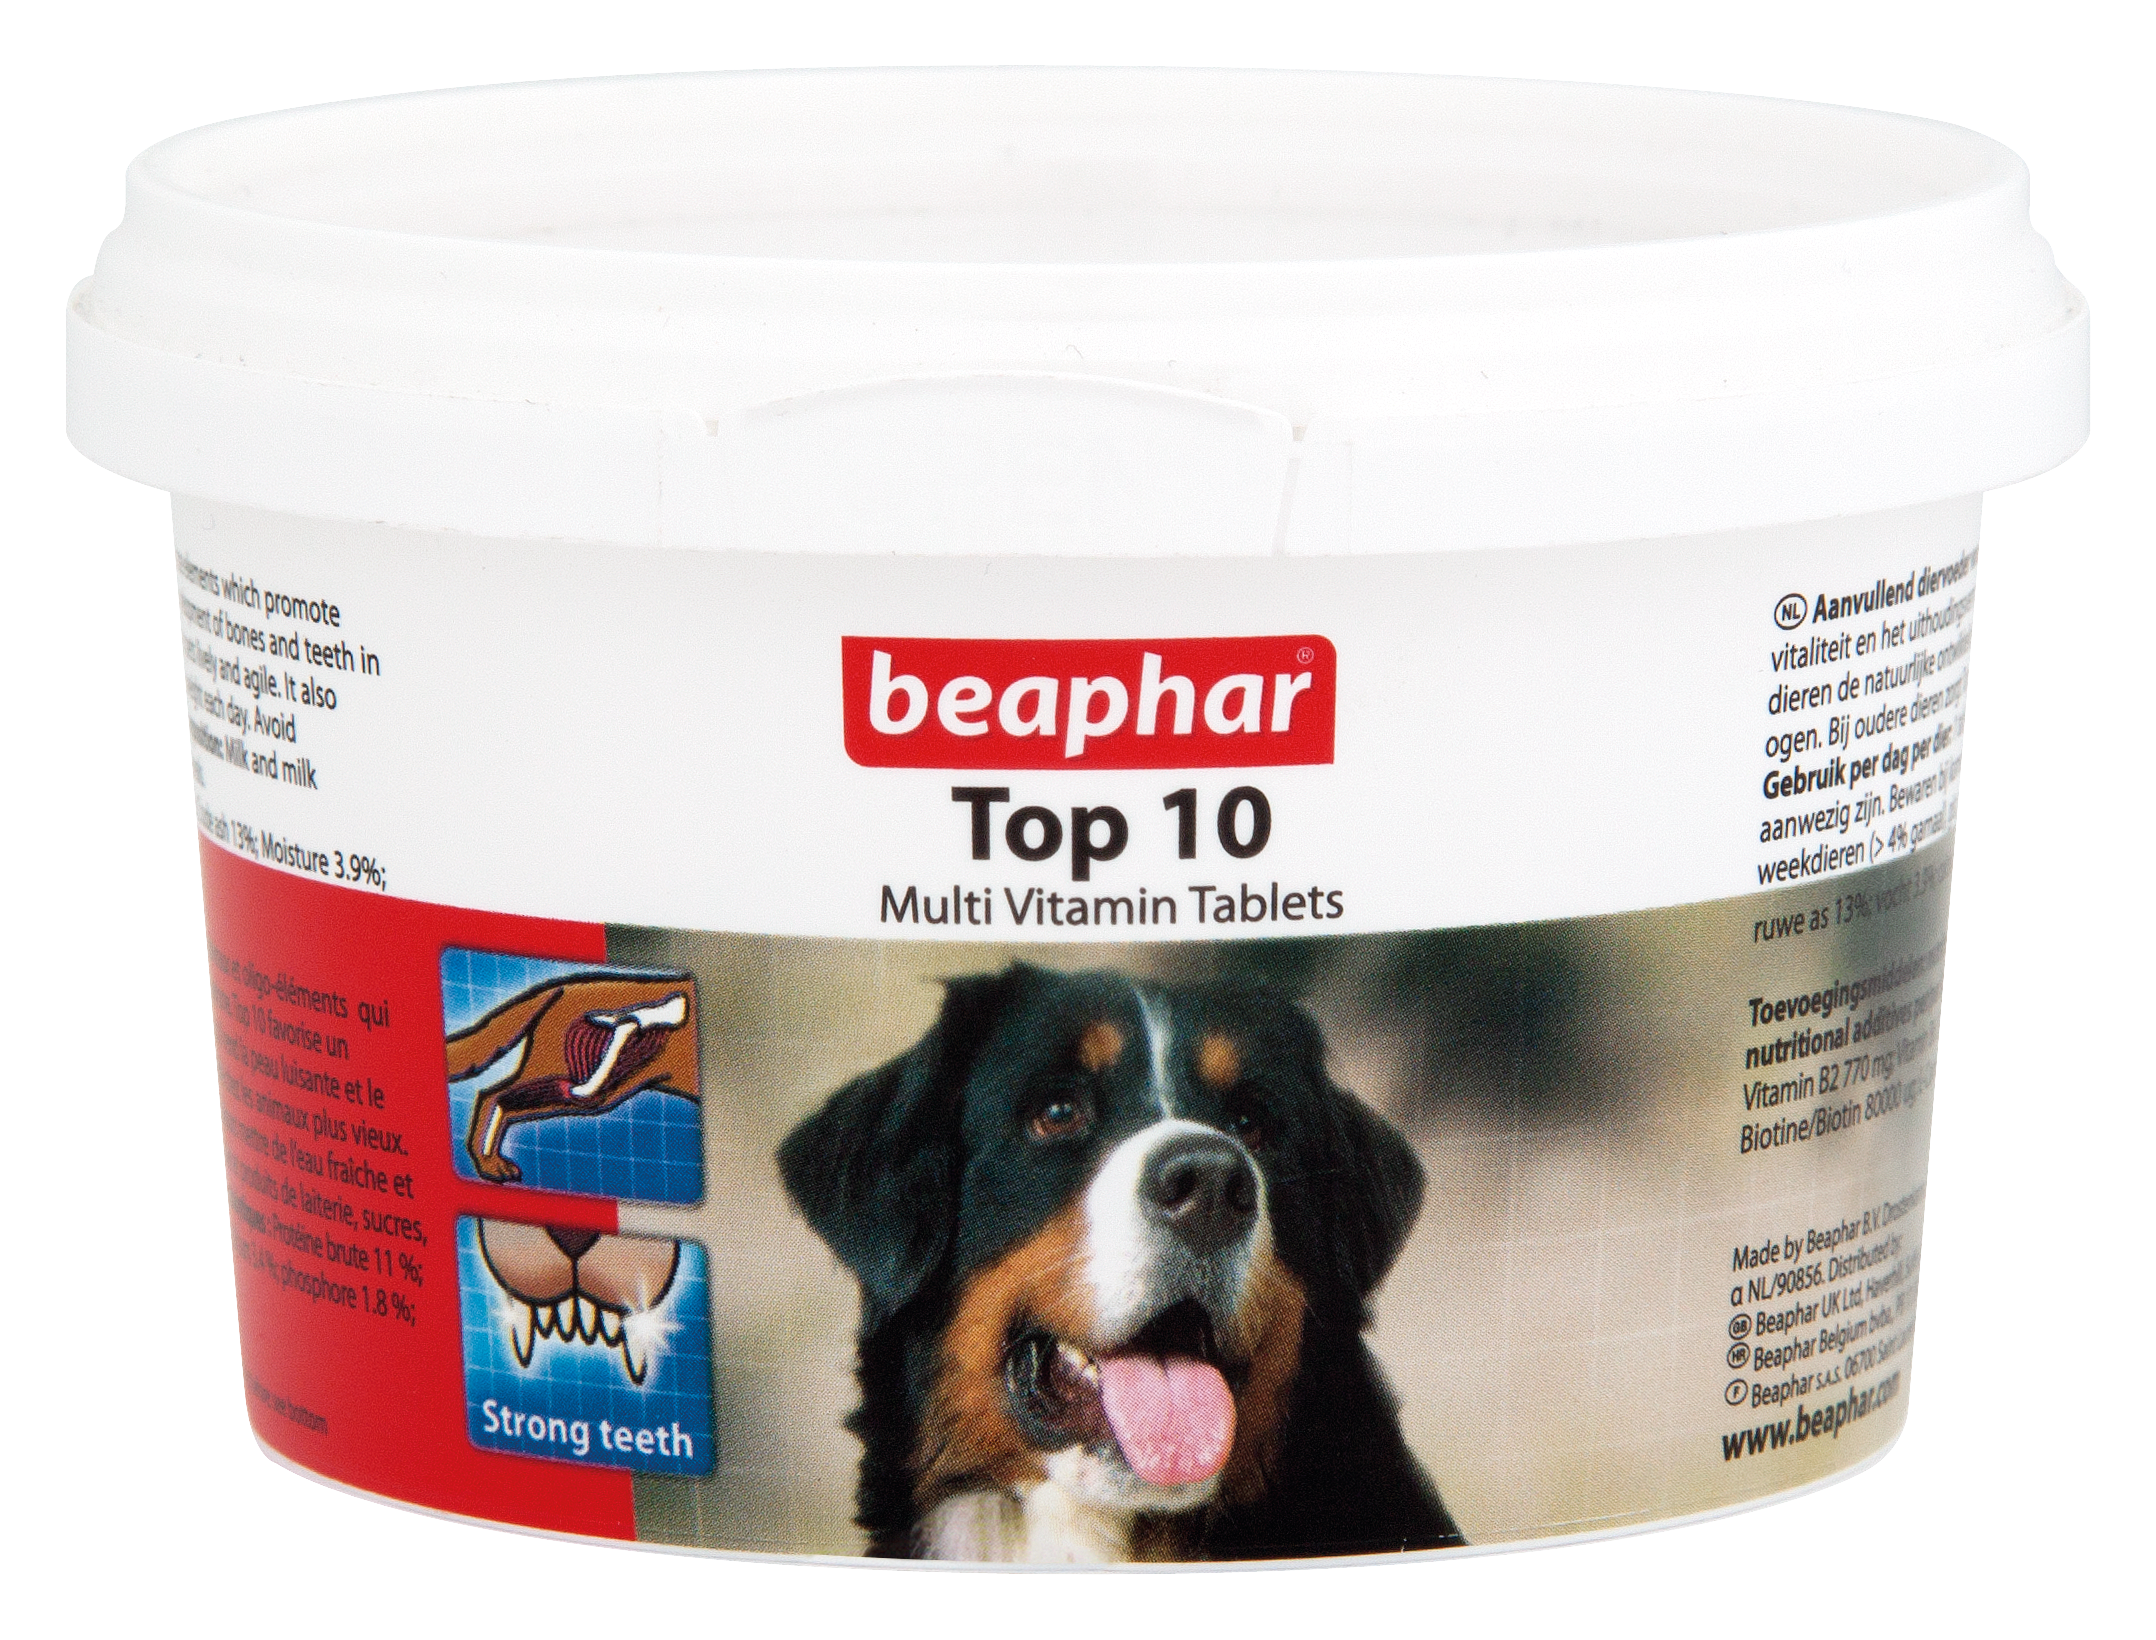 Top 10 Multi-Vitamin Tablets for Dogs